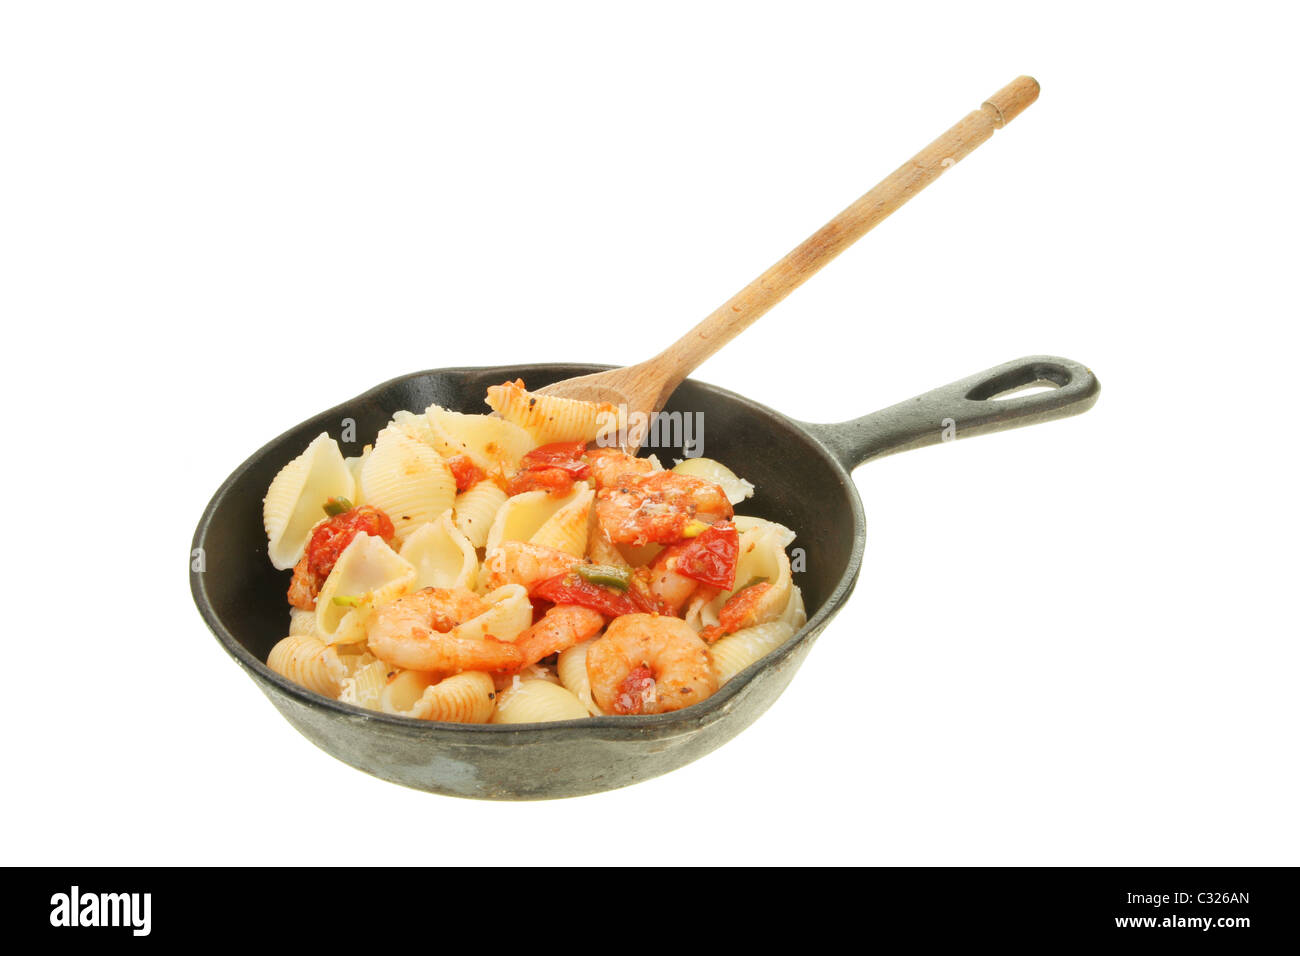 Prawns and conchiglie pasta in a cast iron frying pan Stock Photo